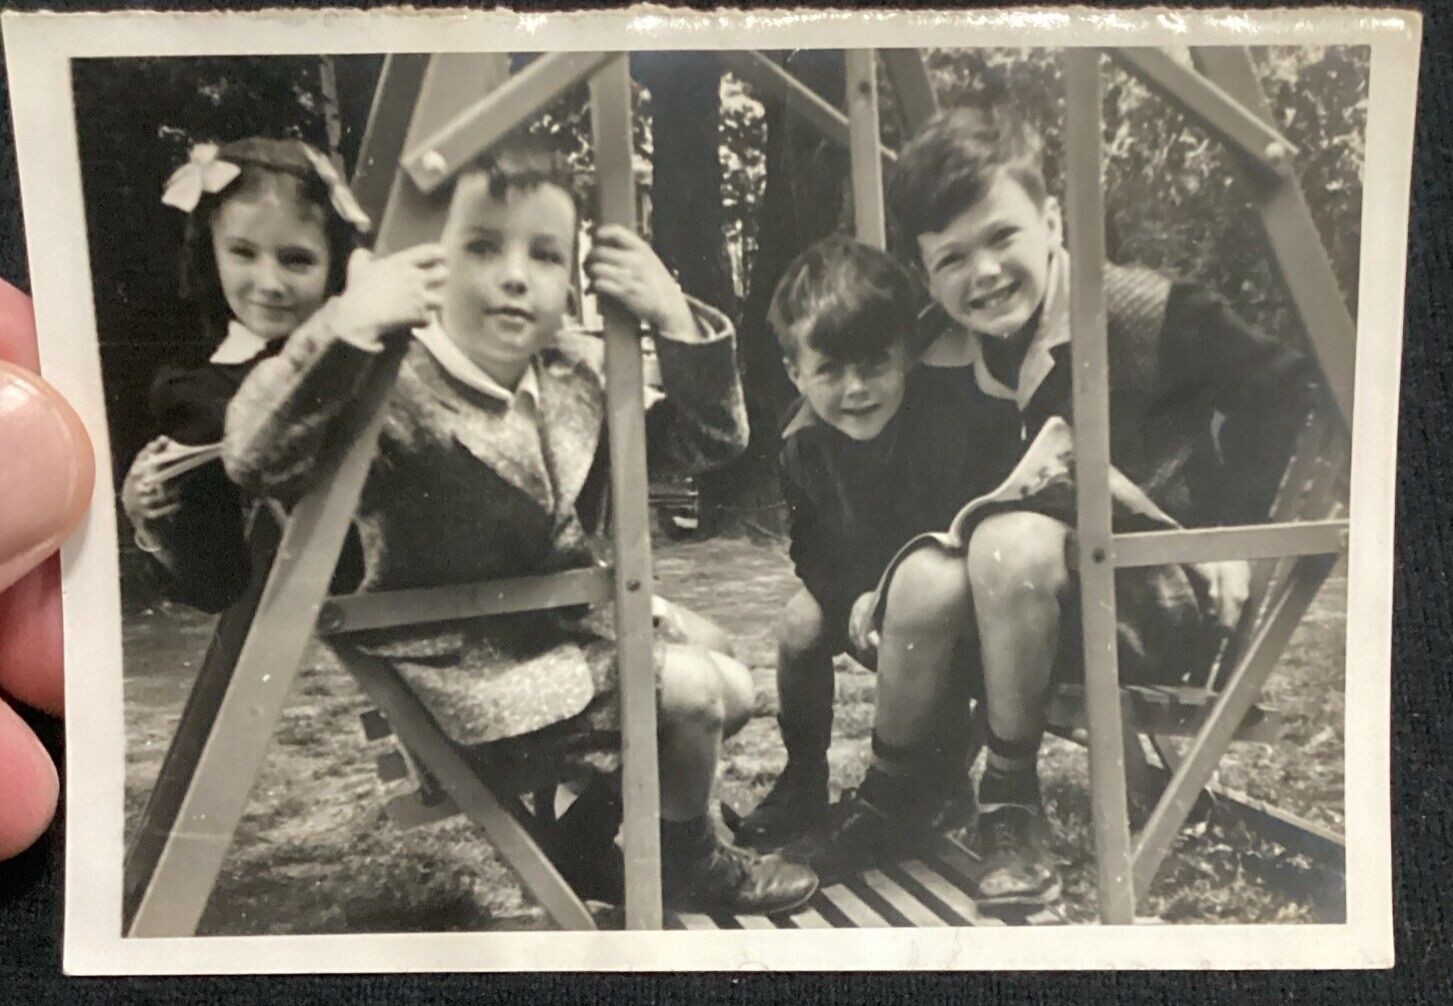 Vintage Photo Of Children On Swingset 1940S Black-And-White Photograph CUTE